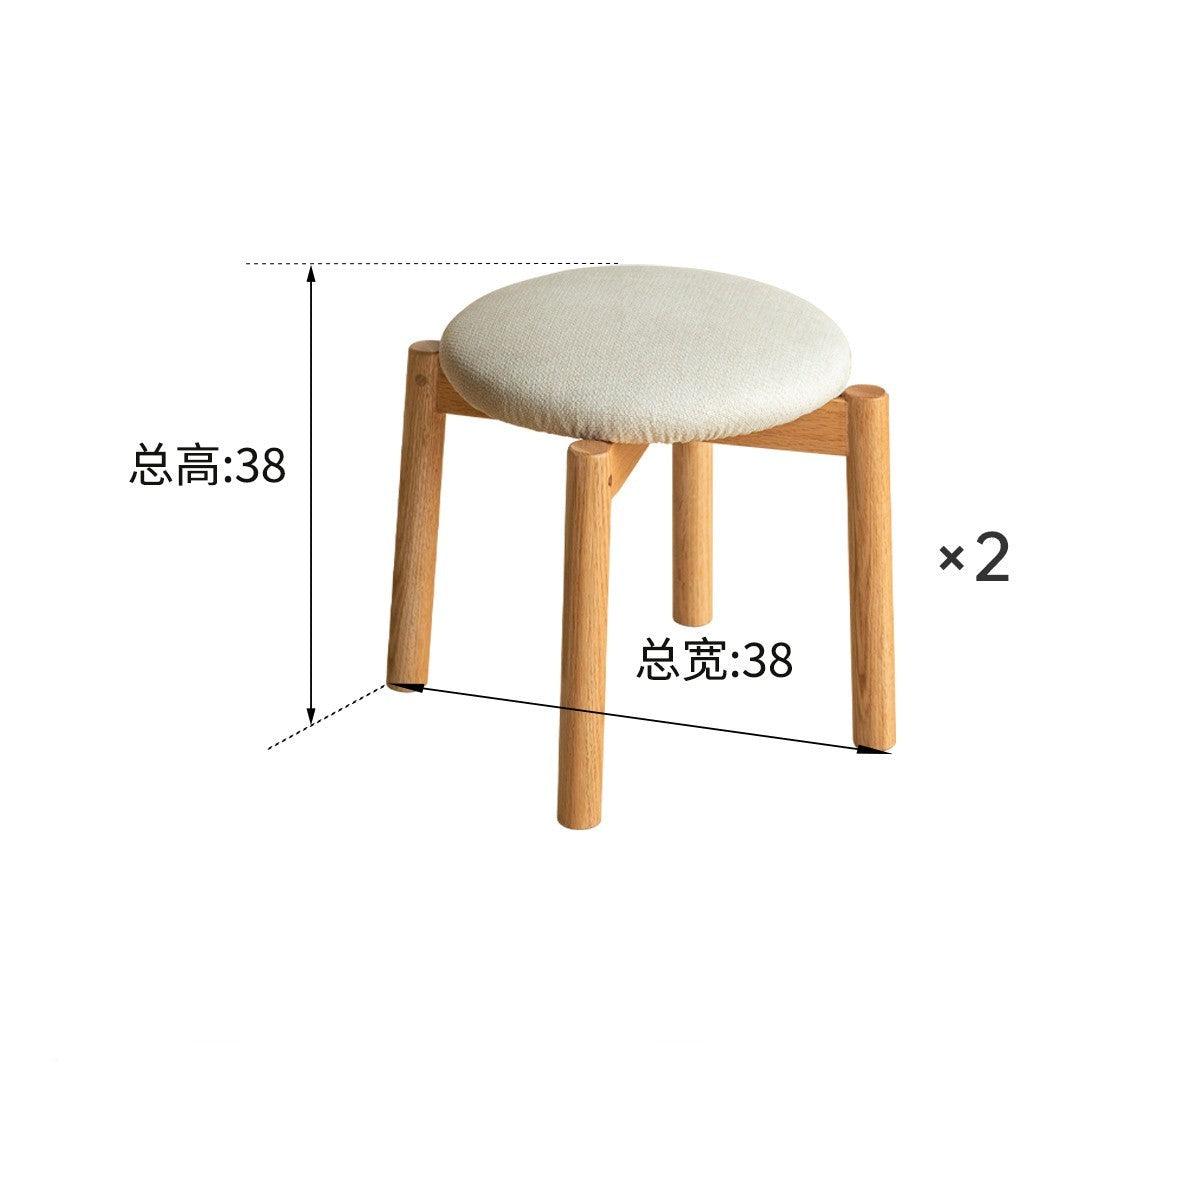 Oak solid wood round stackable stool